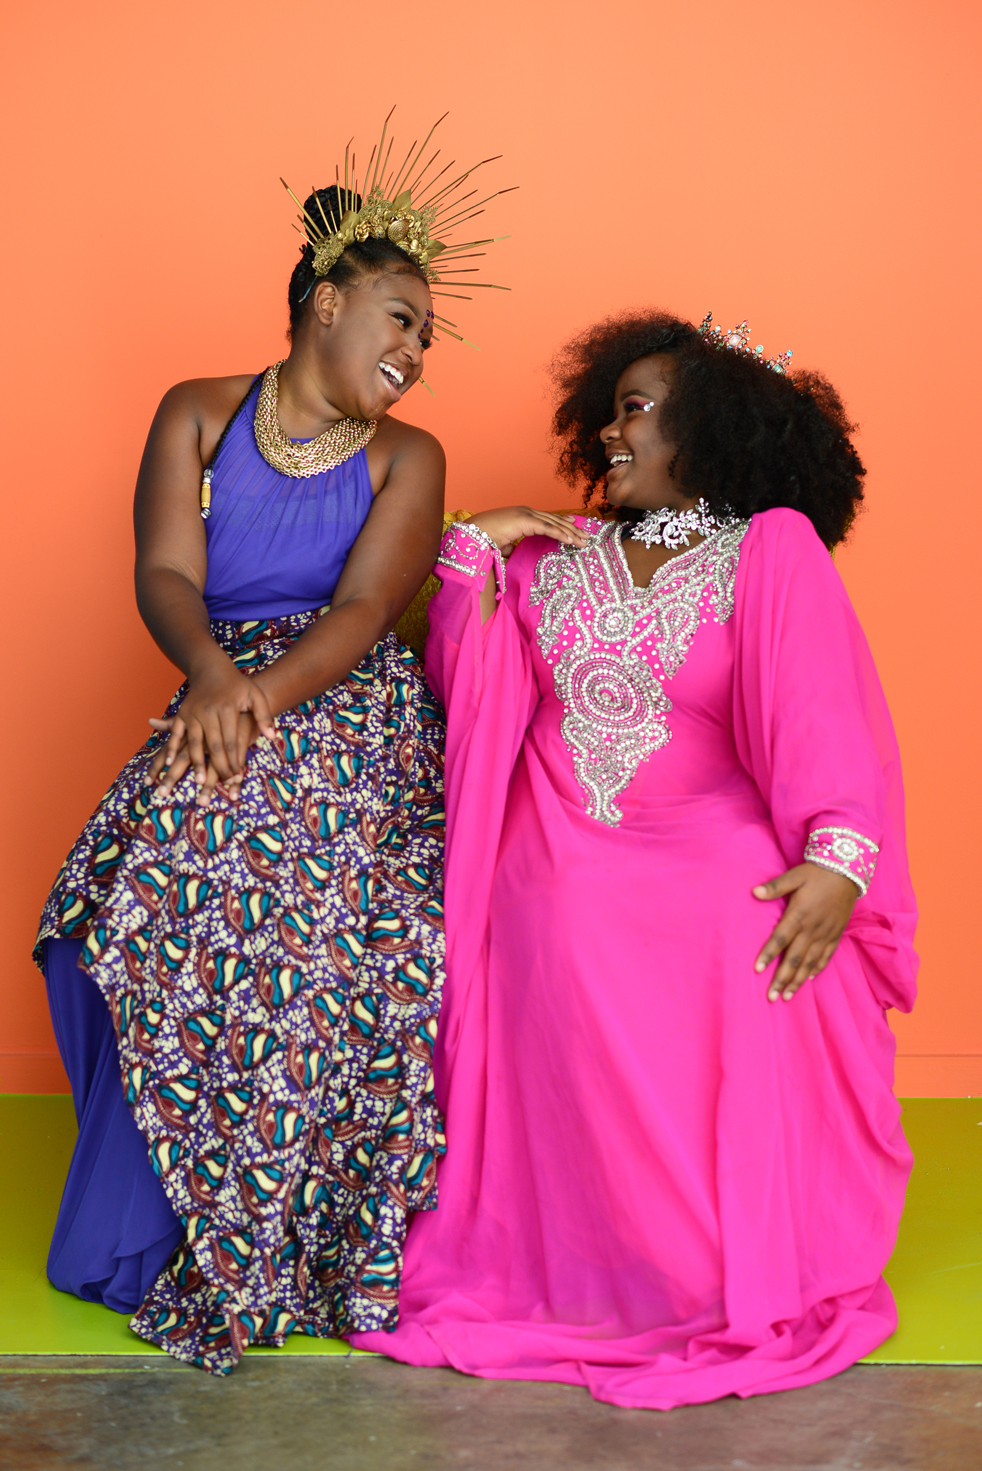 African American teen girls in royal regalia smiling at each other and sharing a throne. The girl on the left wears a royal purple dress and the girl on the right wears a hot pink gown. Both girls don crowns and sit in front of an orange backdrop. Building Opportunities & Opening Minds, 2022.